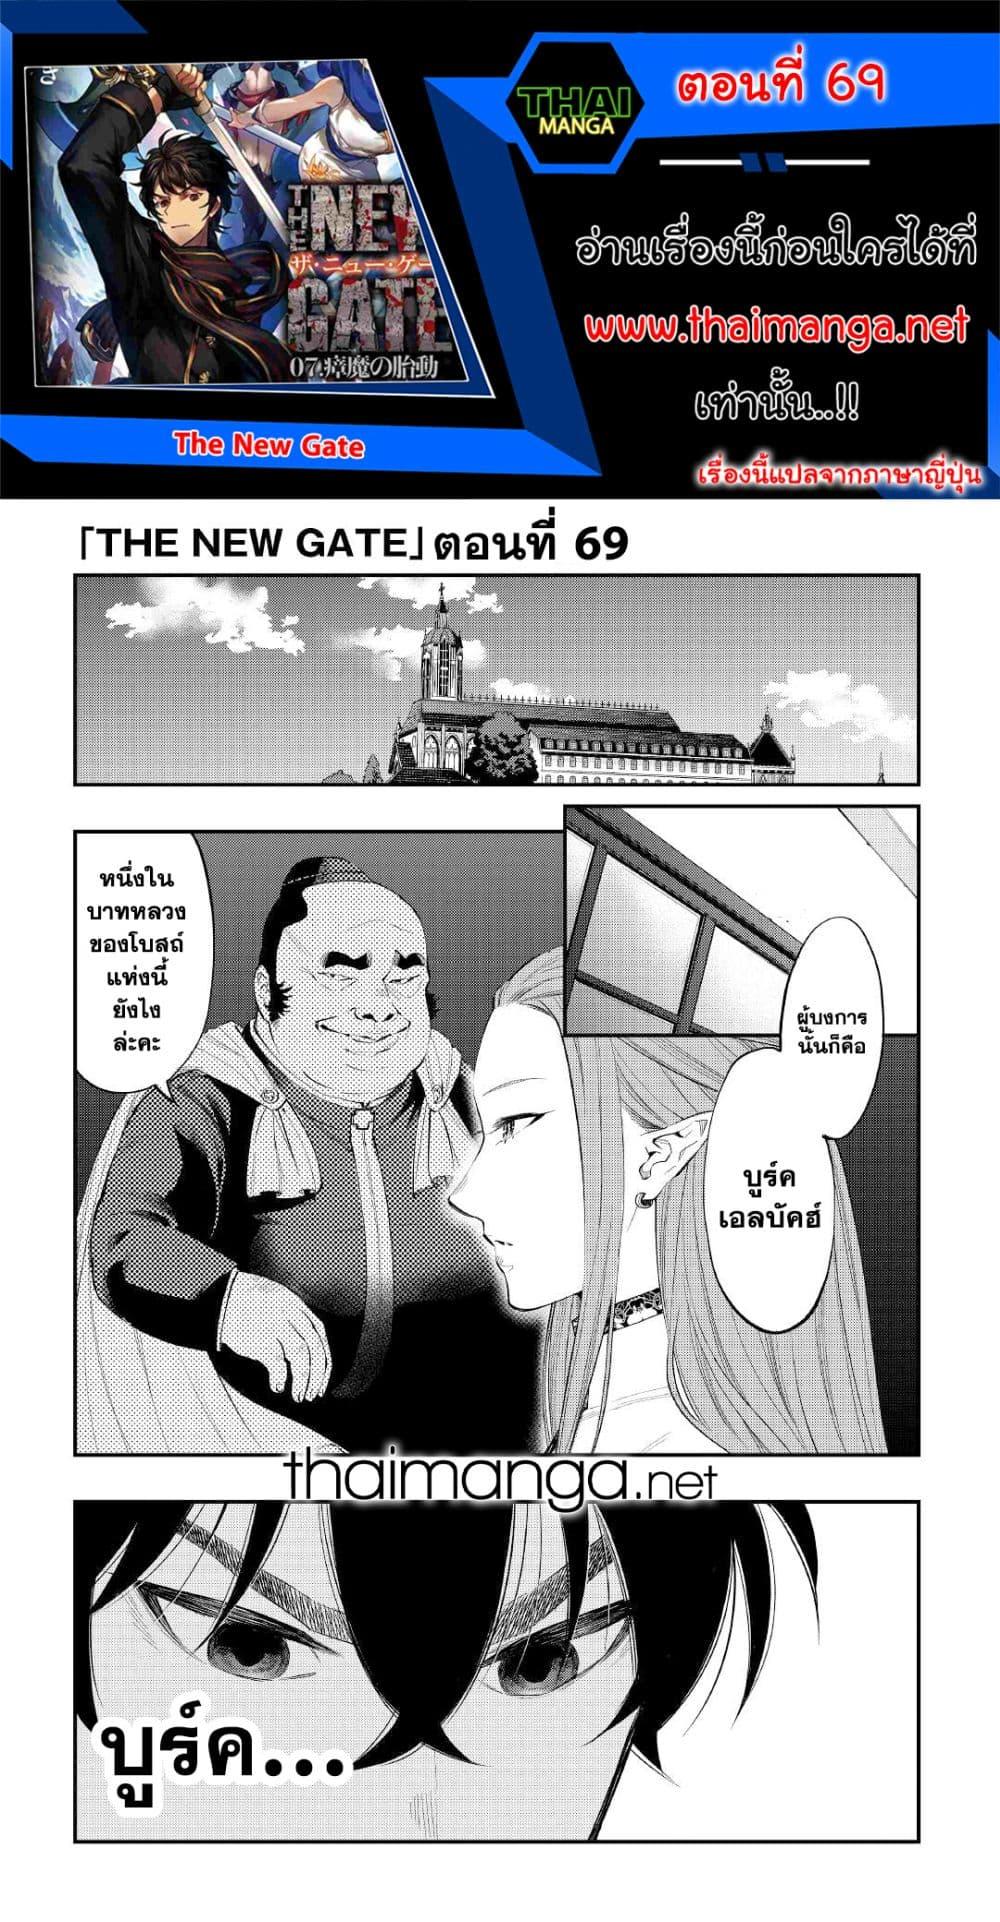 The New Gate 69 (1)